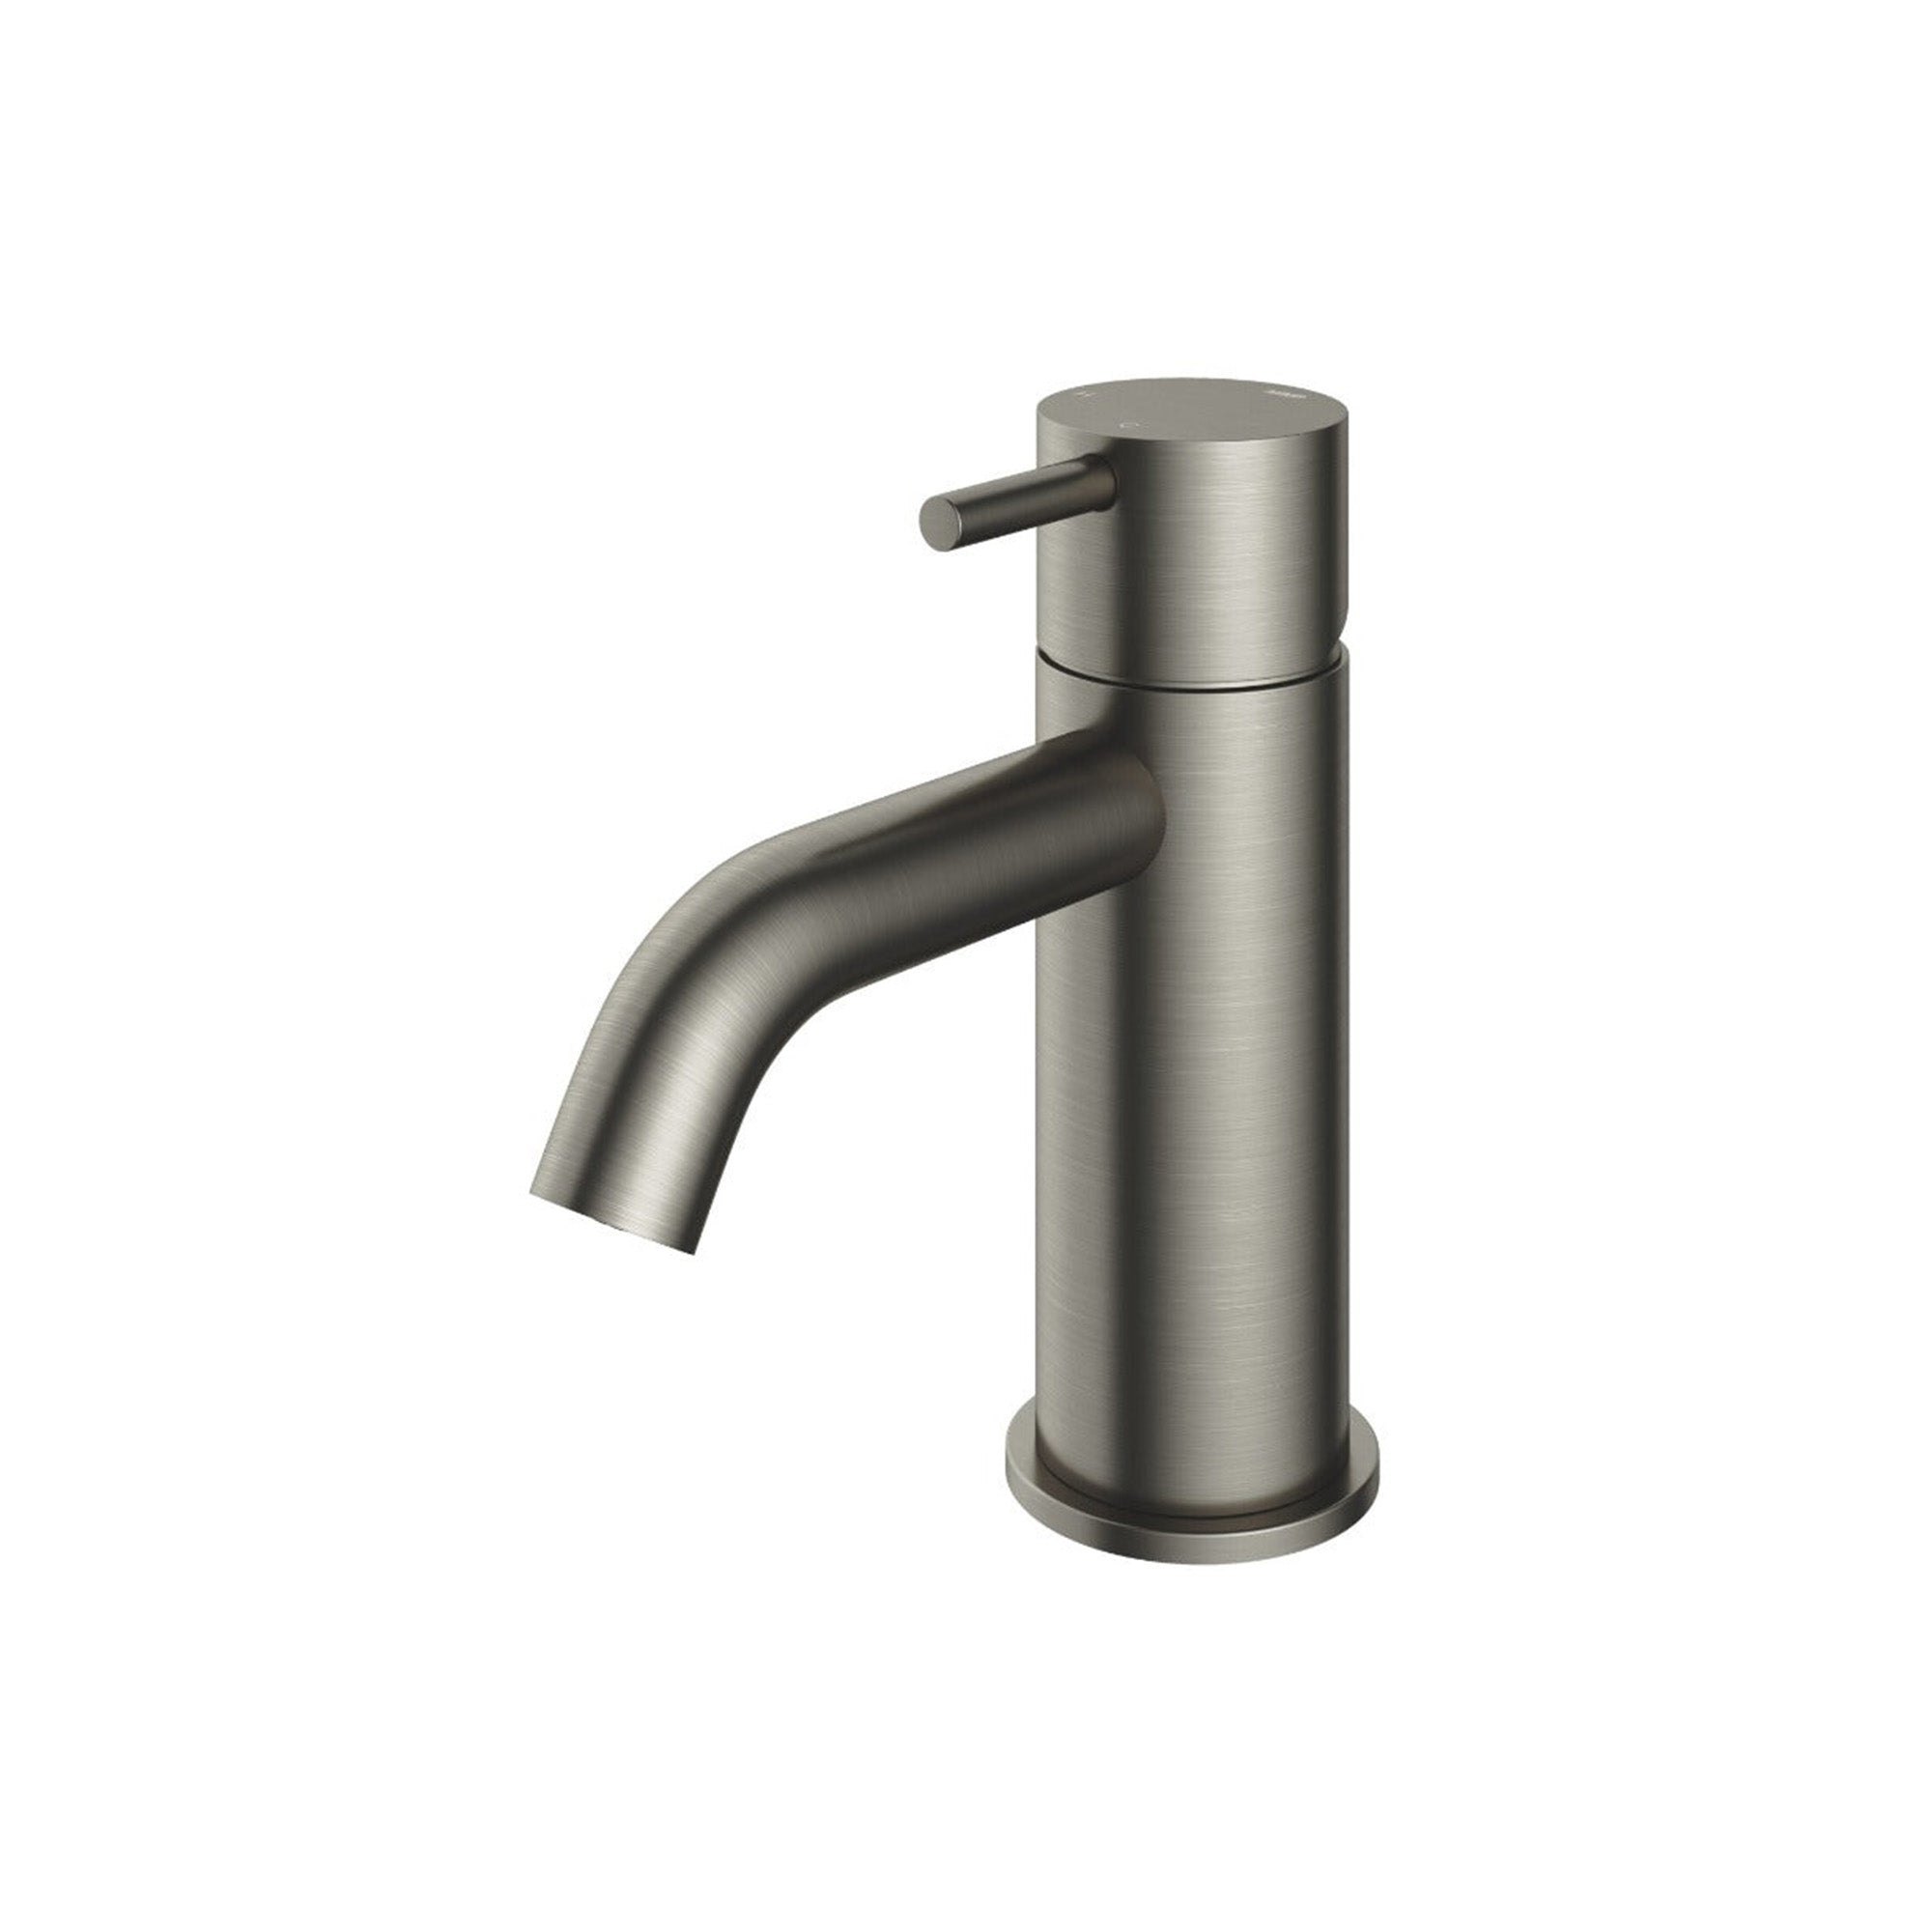 cobber basin mixer tap monobloc curved spout brushed nickel